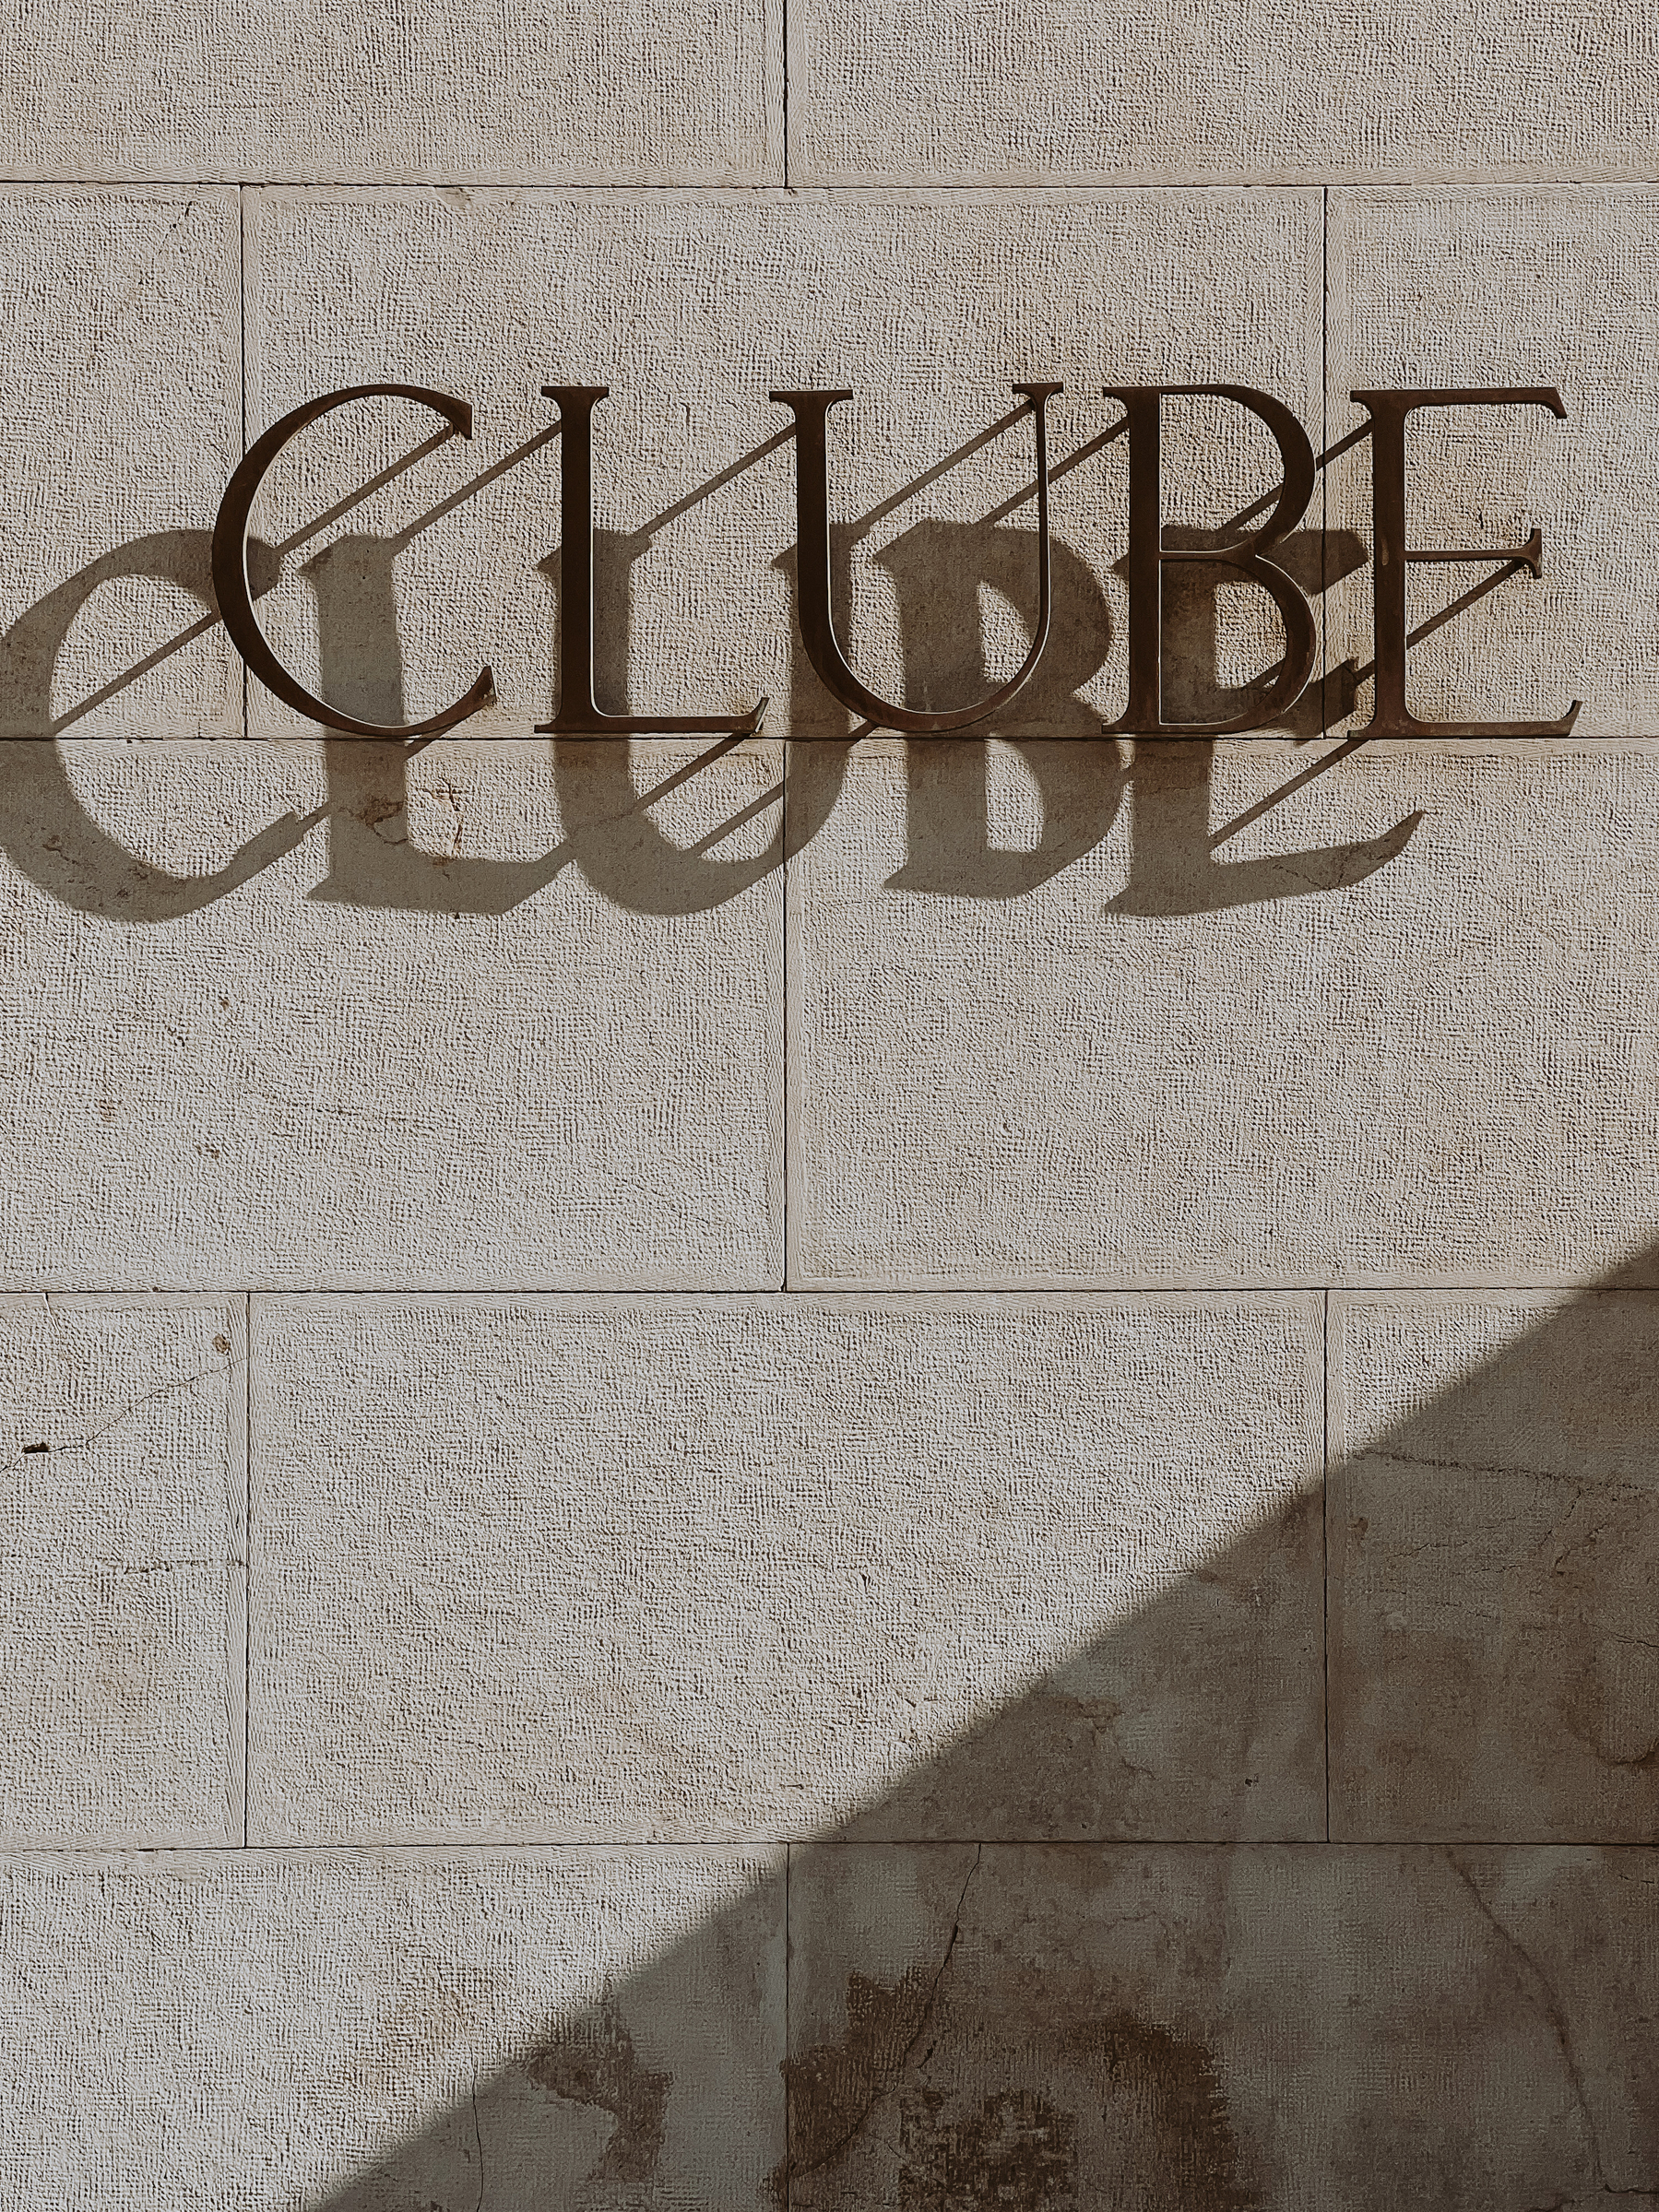 The word “Clube”, on a wall, with a drop shadow effect. 